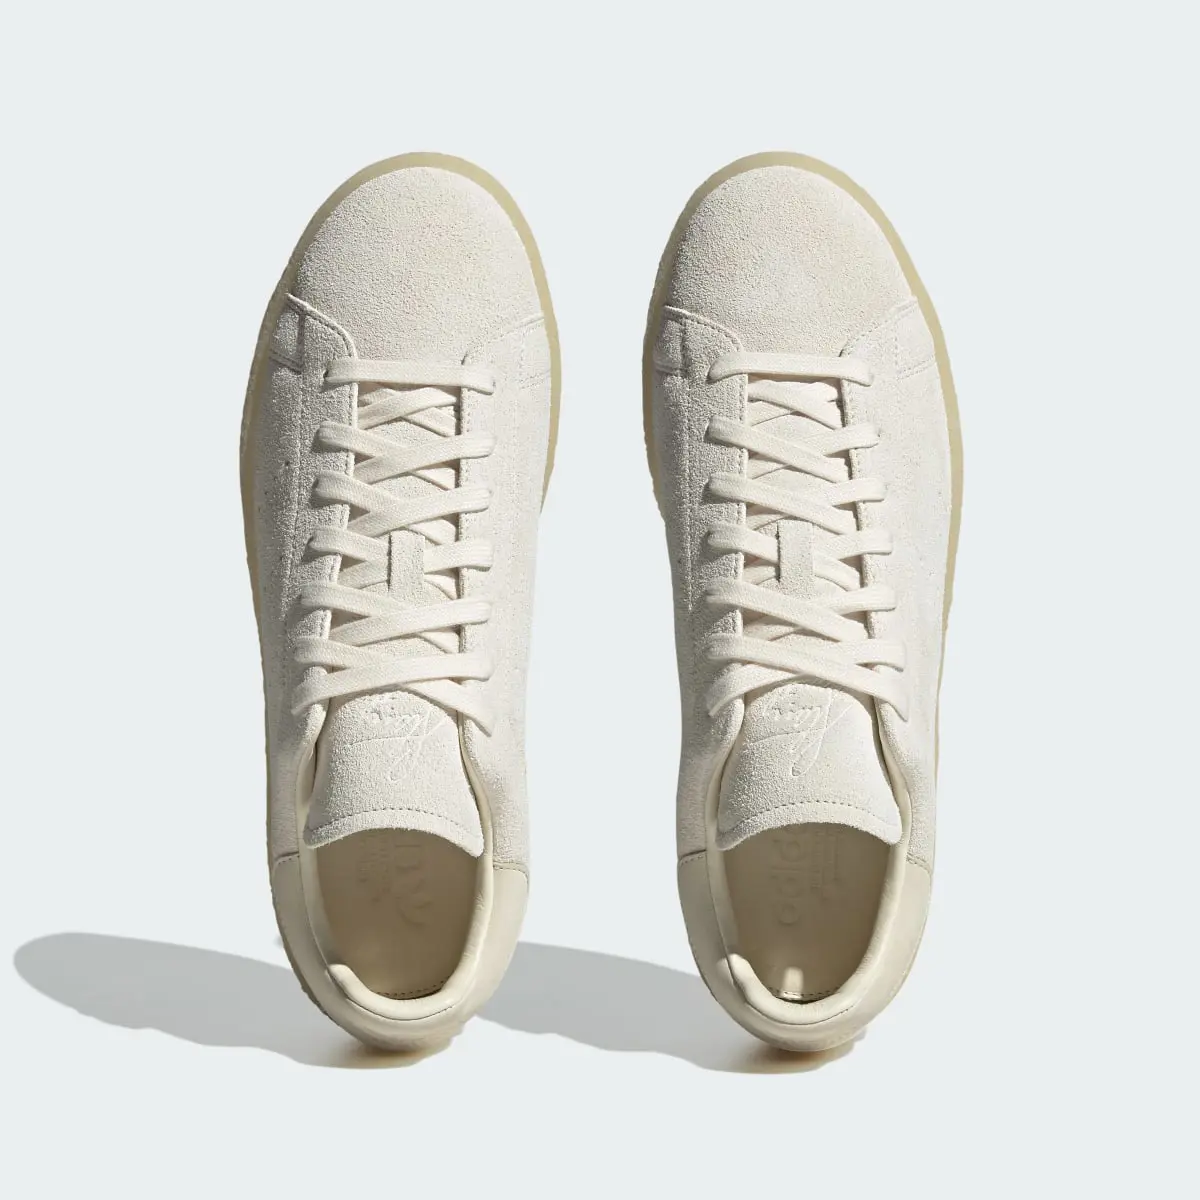 Adidas Stan Smith Crepe Shoes. 3